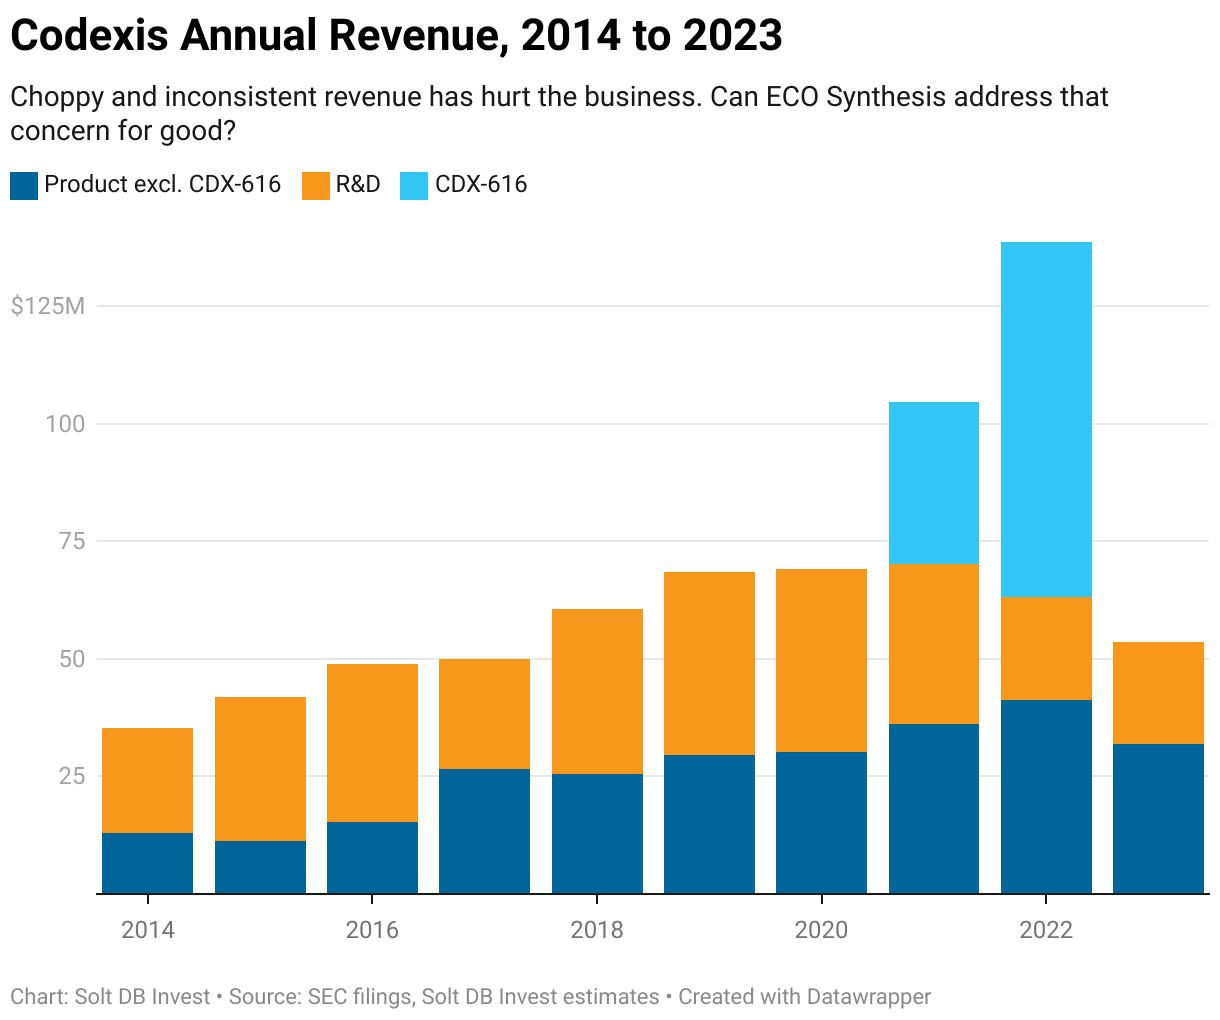 A stacked bar chart showing annual revenue for Codexis by business segment from 2014 to 2023.